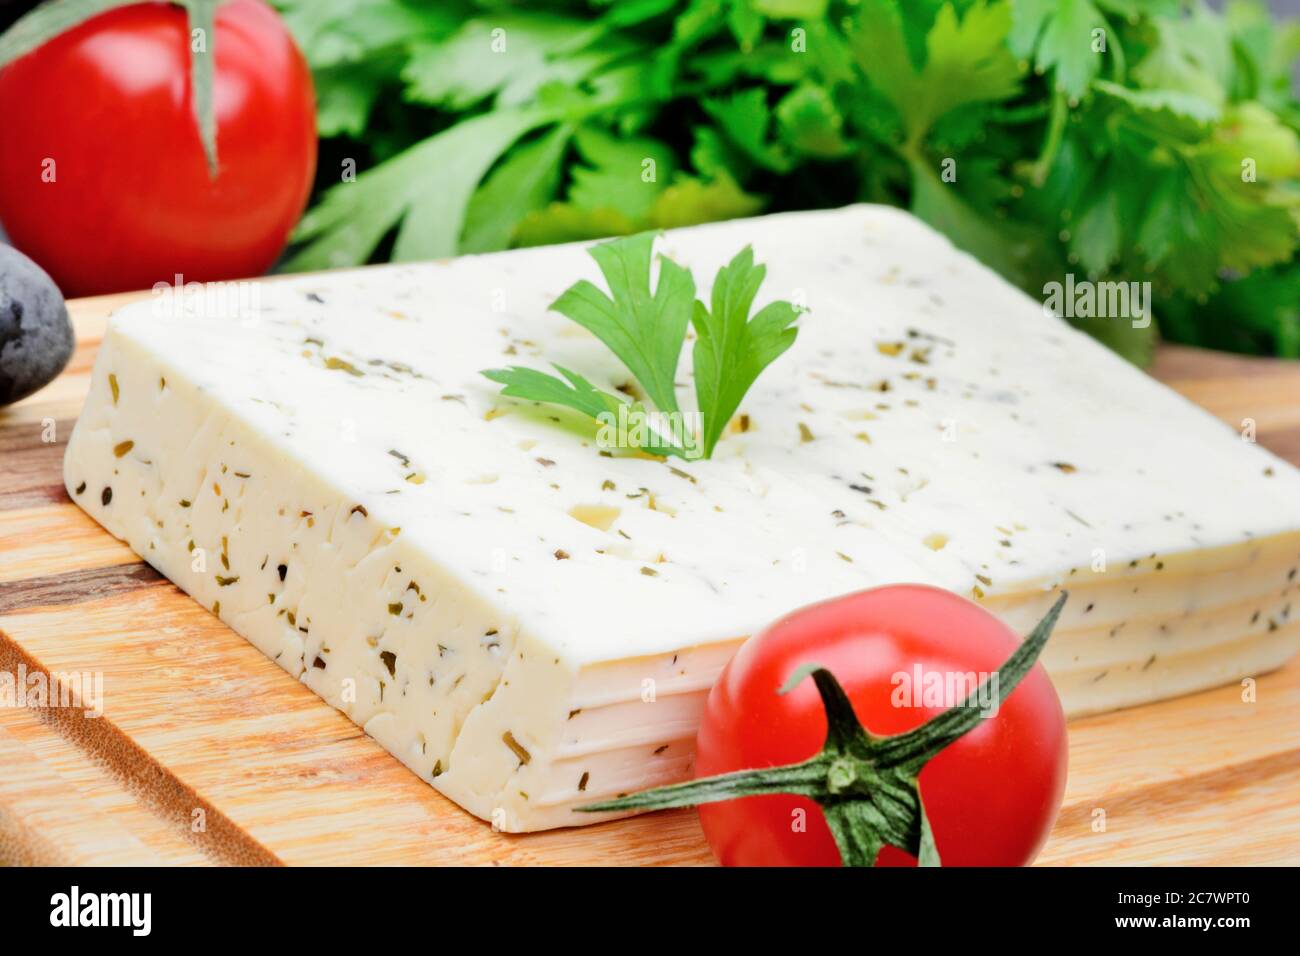 Close up of cheese with herbs and tomatoes on cutting board Stock Photo